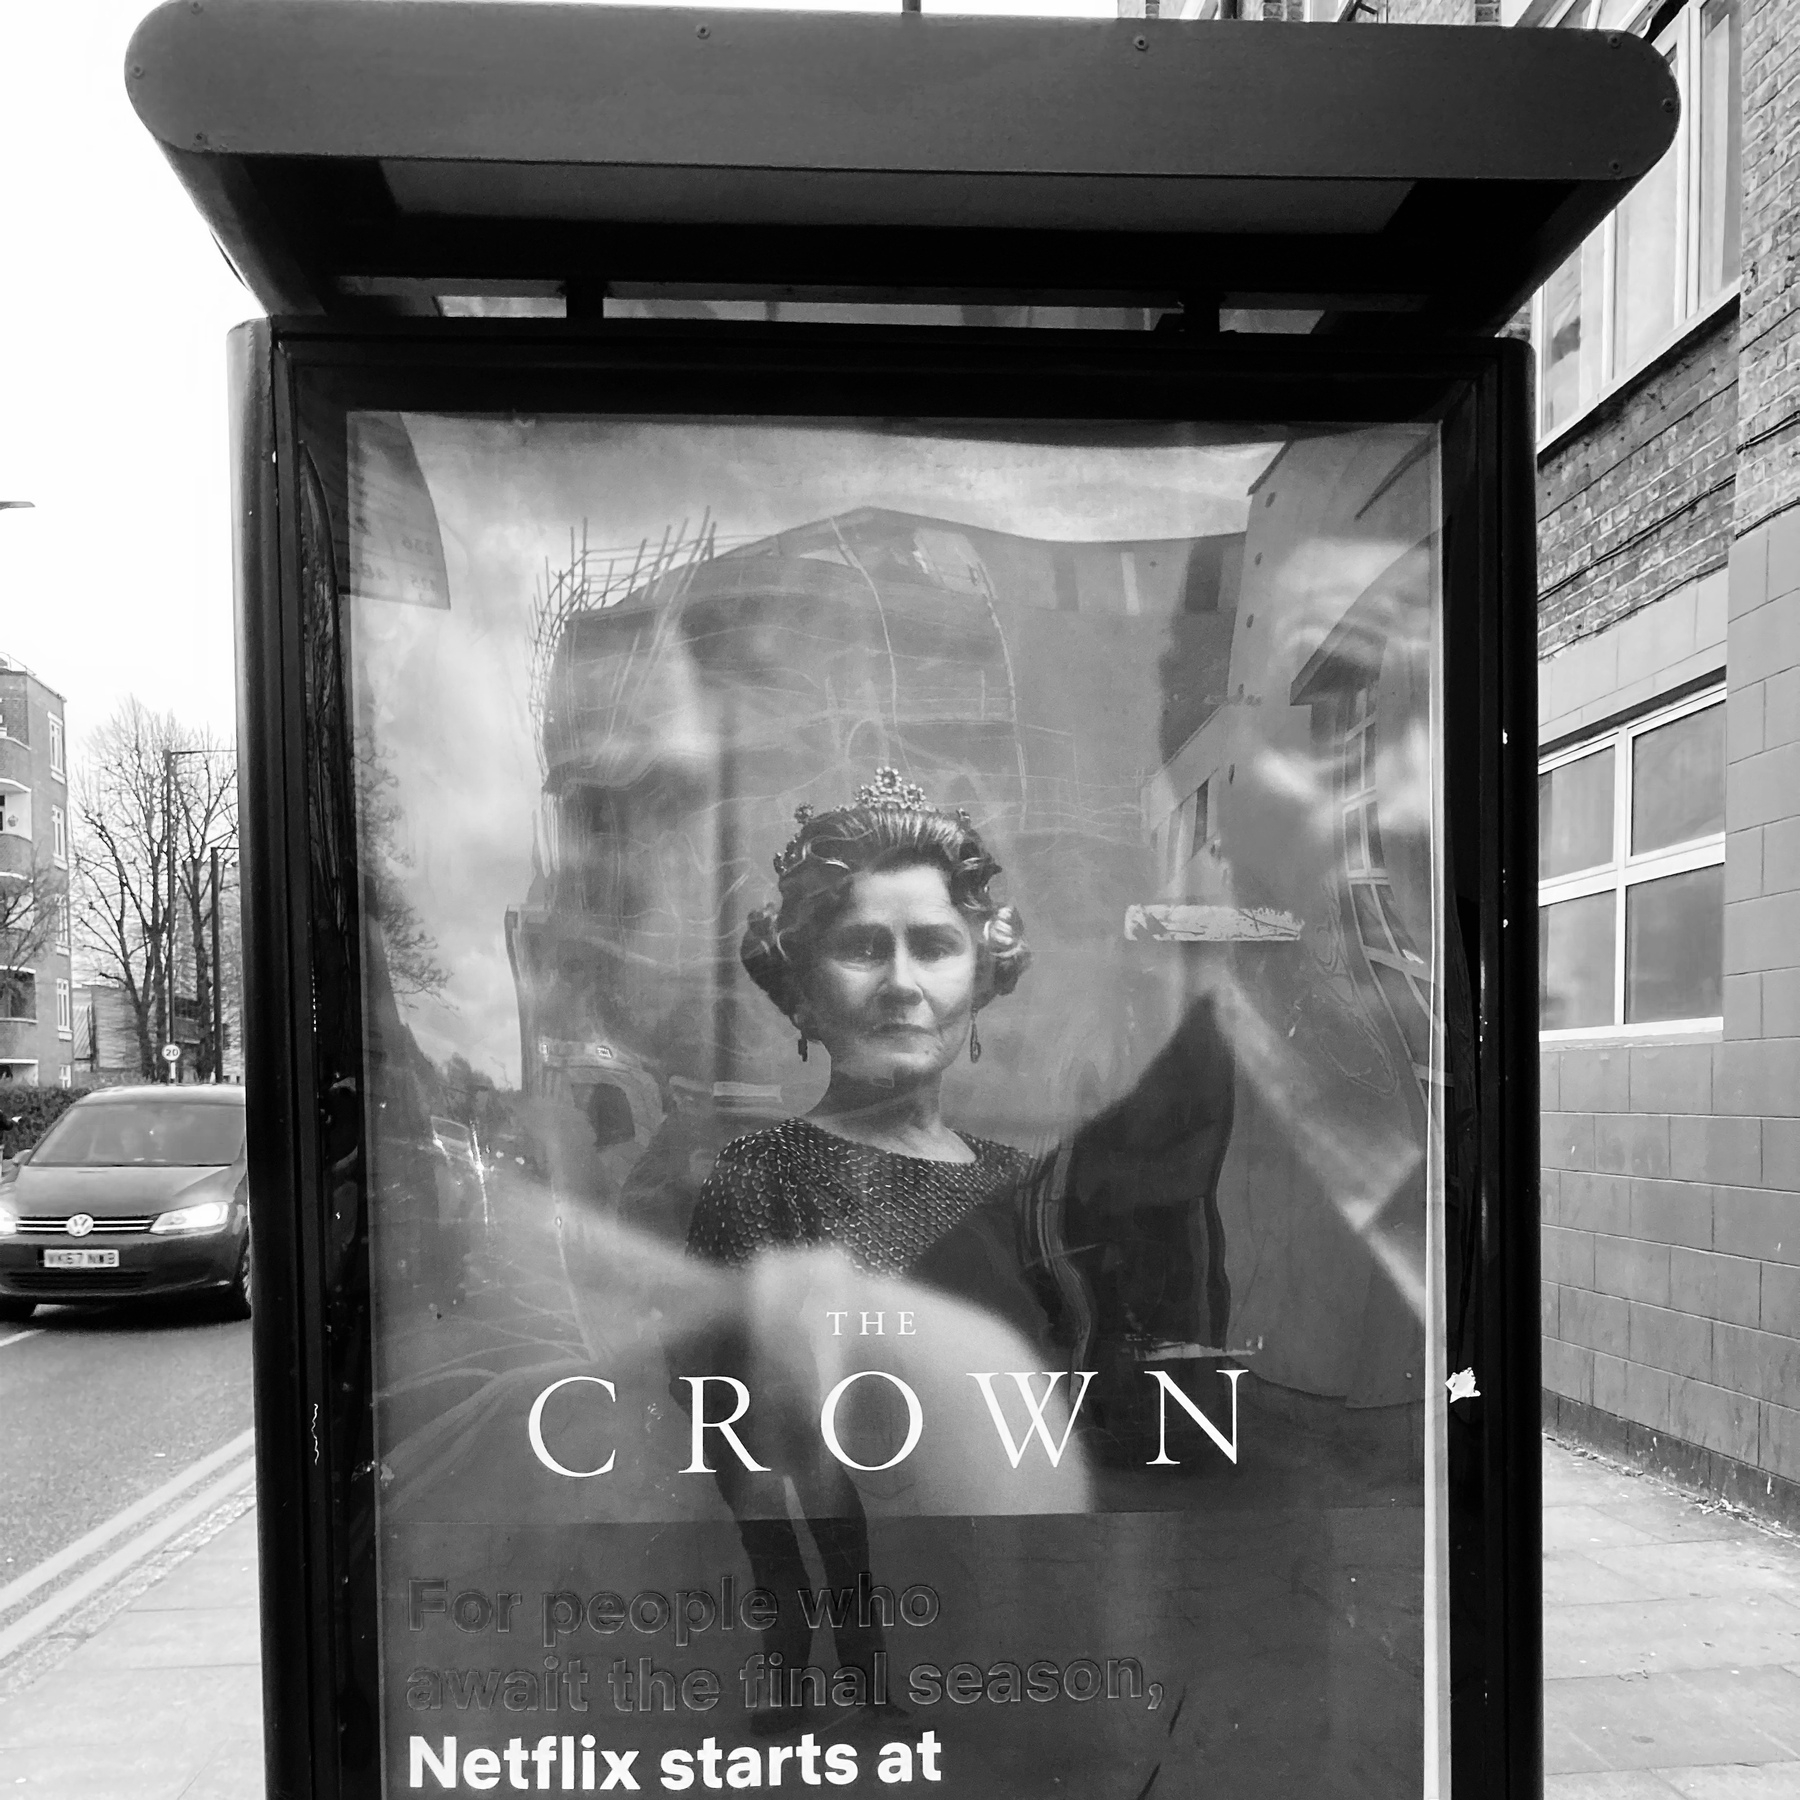 Netflix poster on a bus stop in Homerton